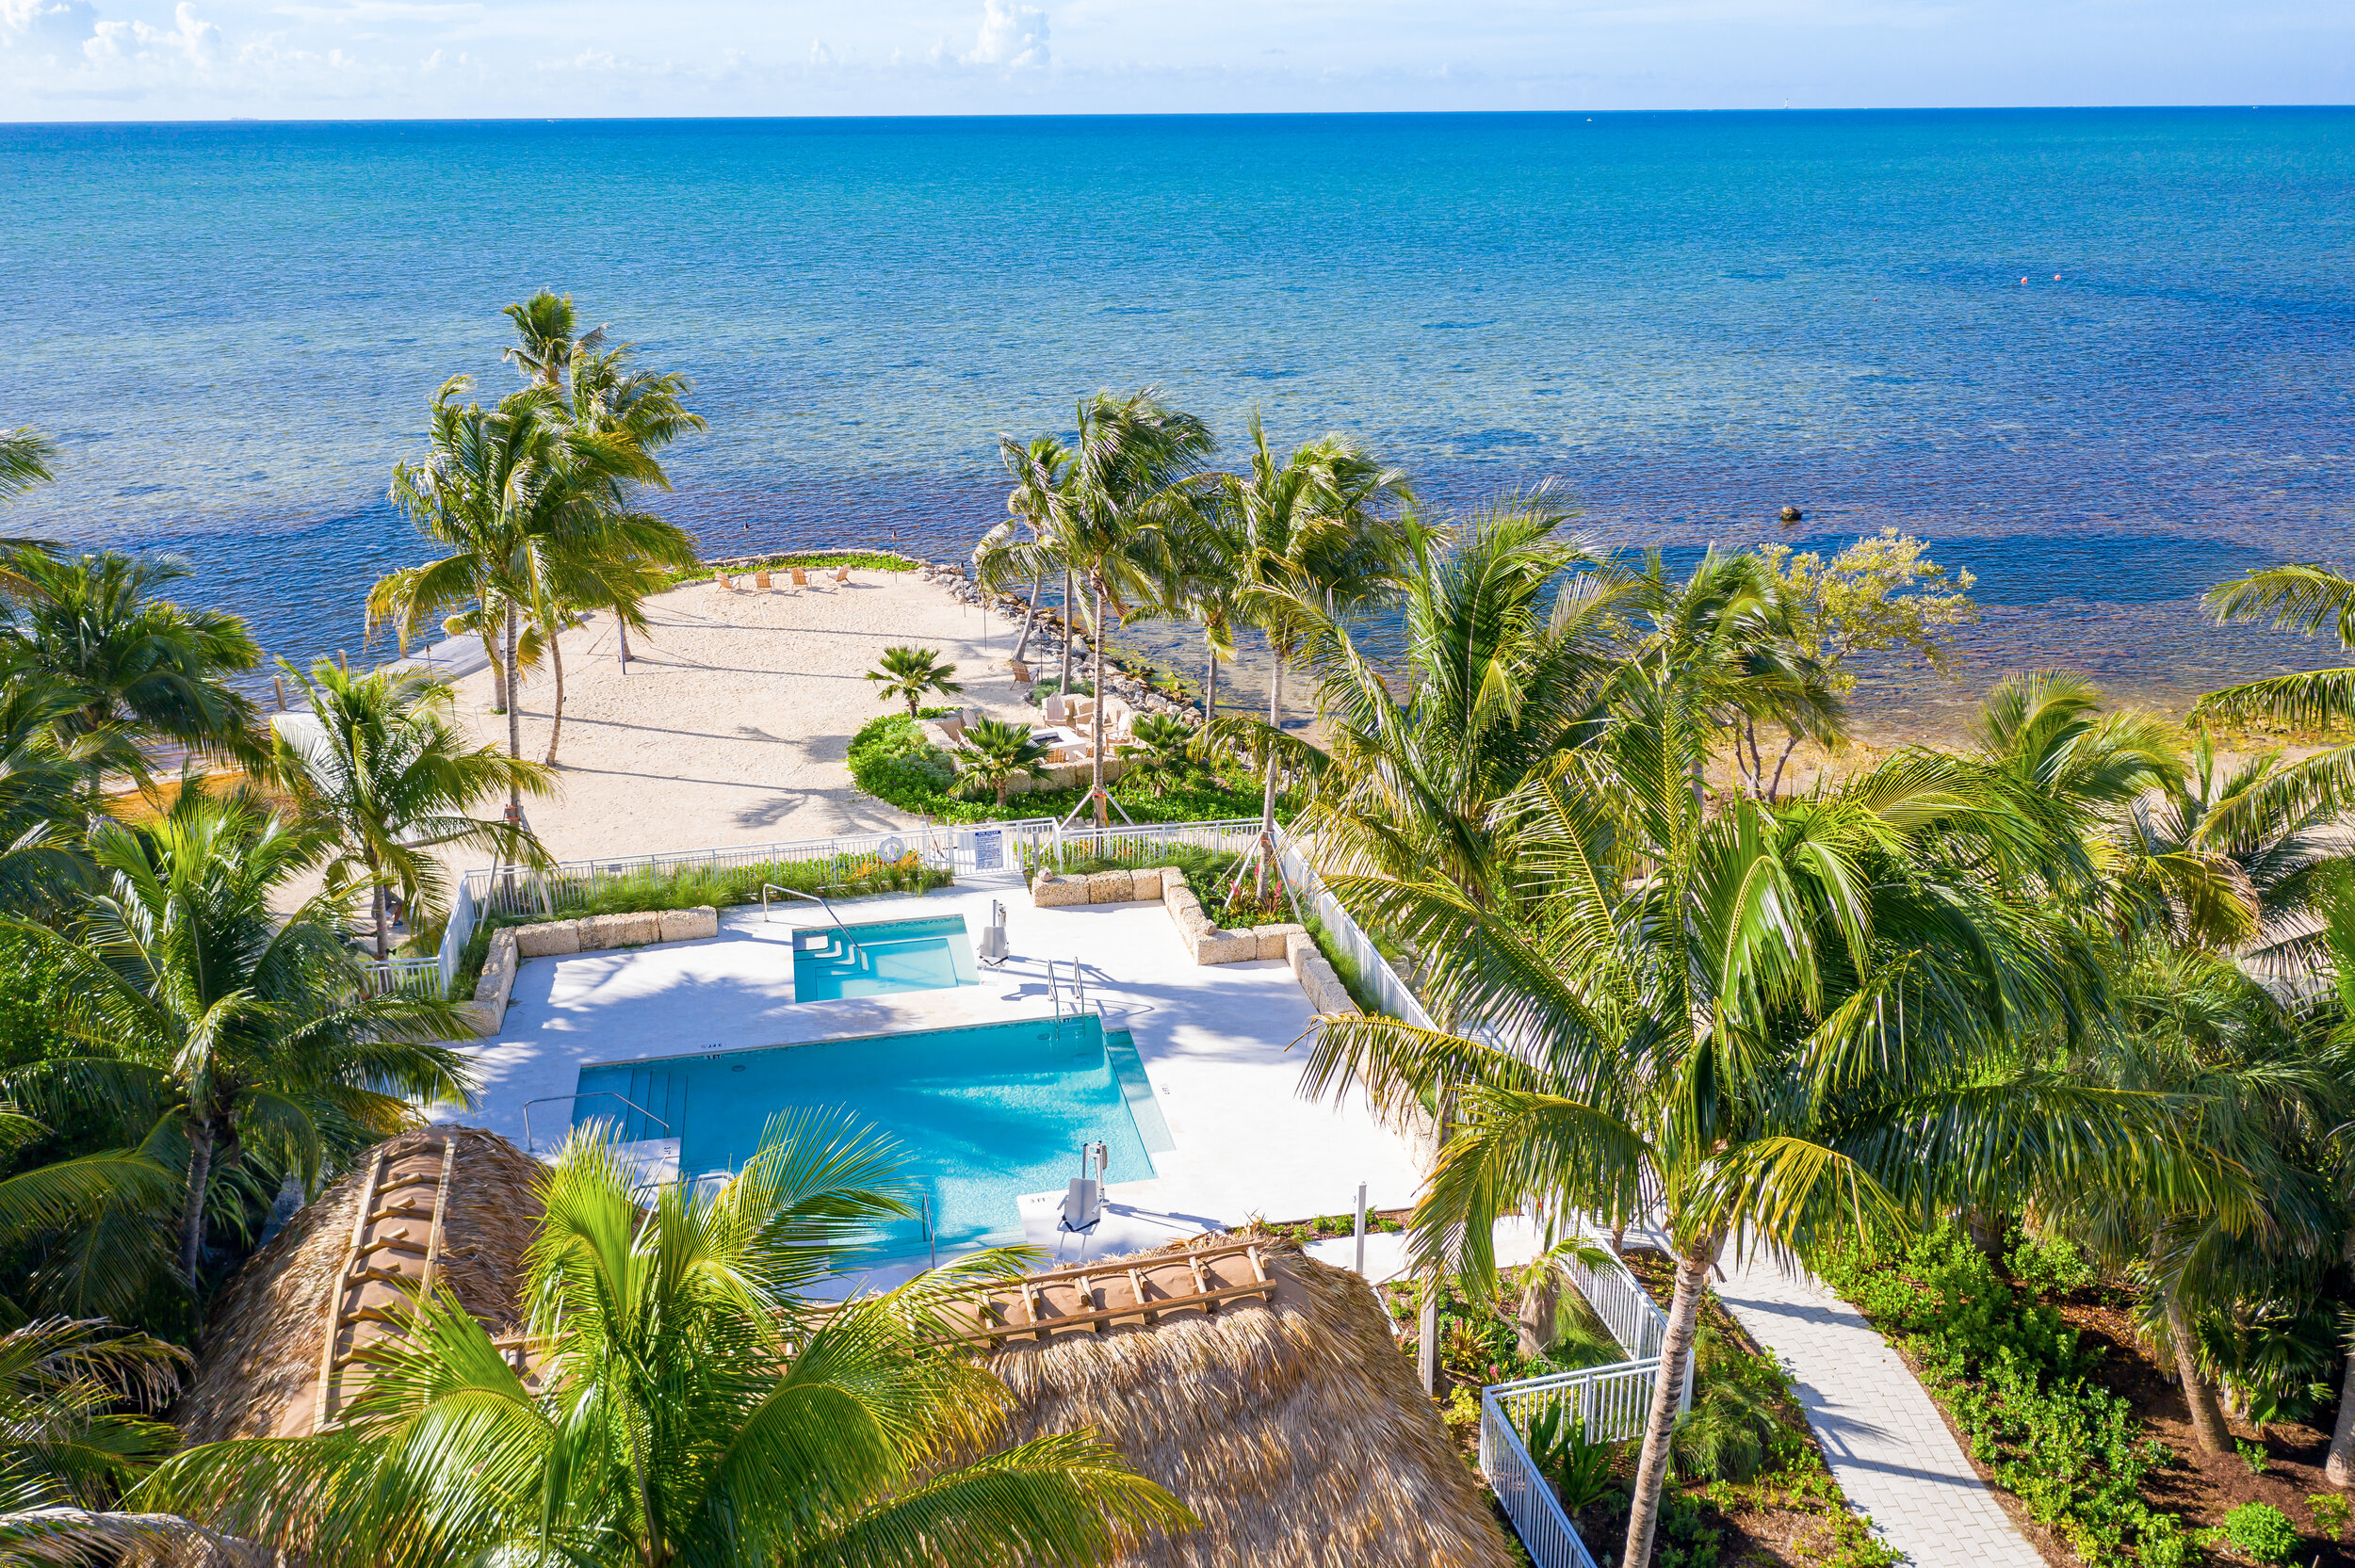  Aerial View Of The Islands Of Islamorada Tiki Bar And Pool With Ocean View. 